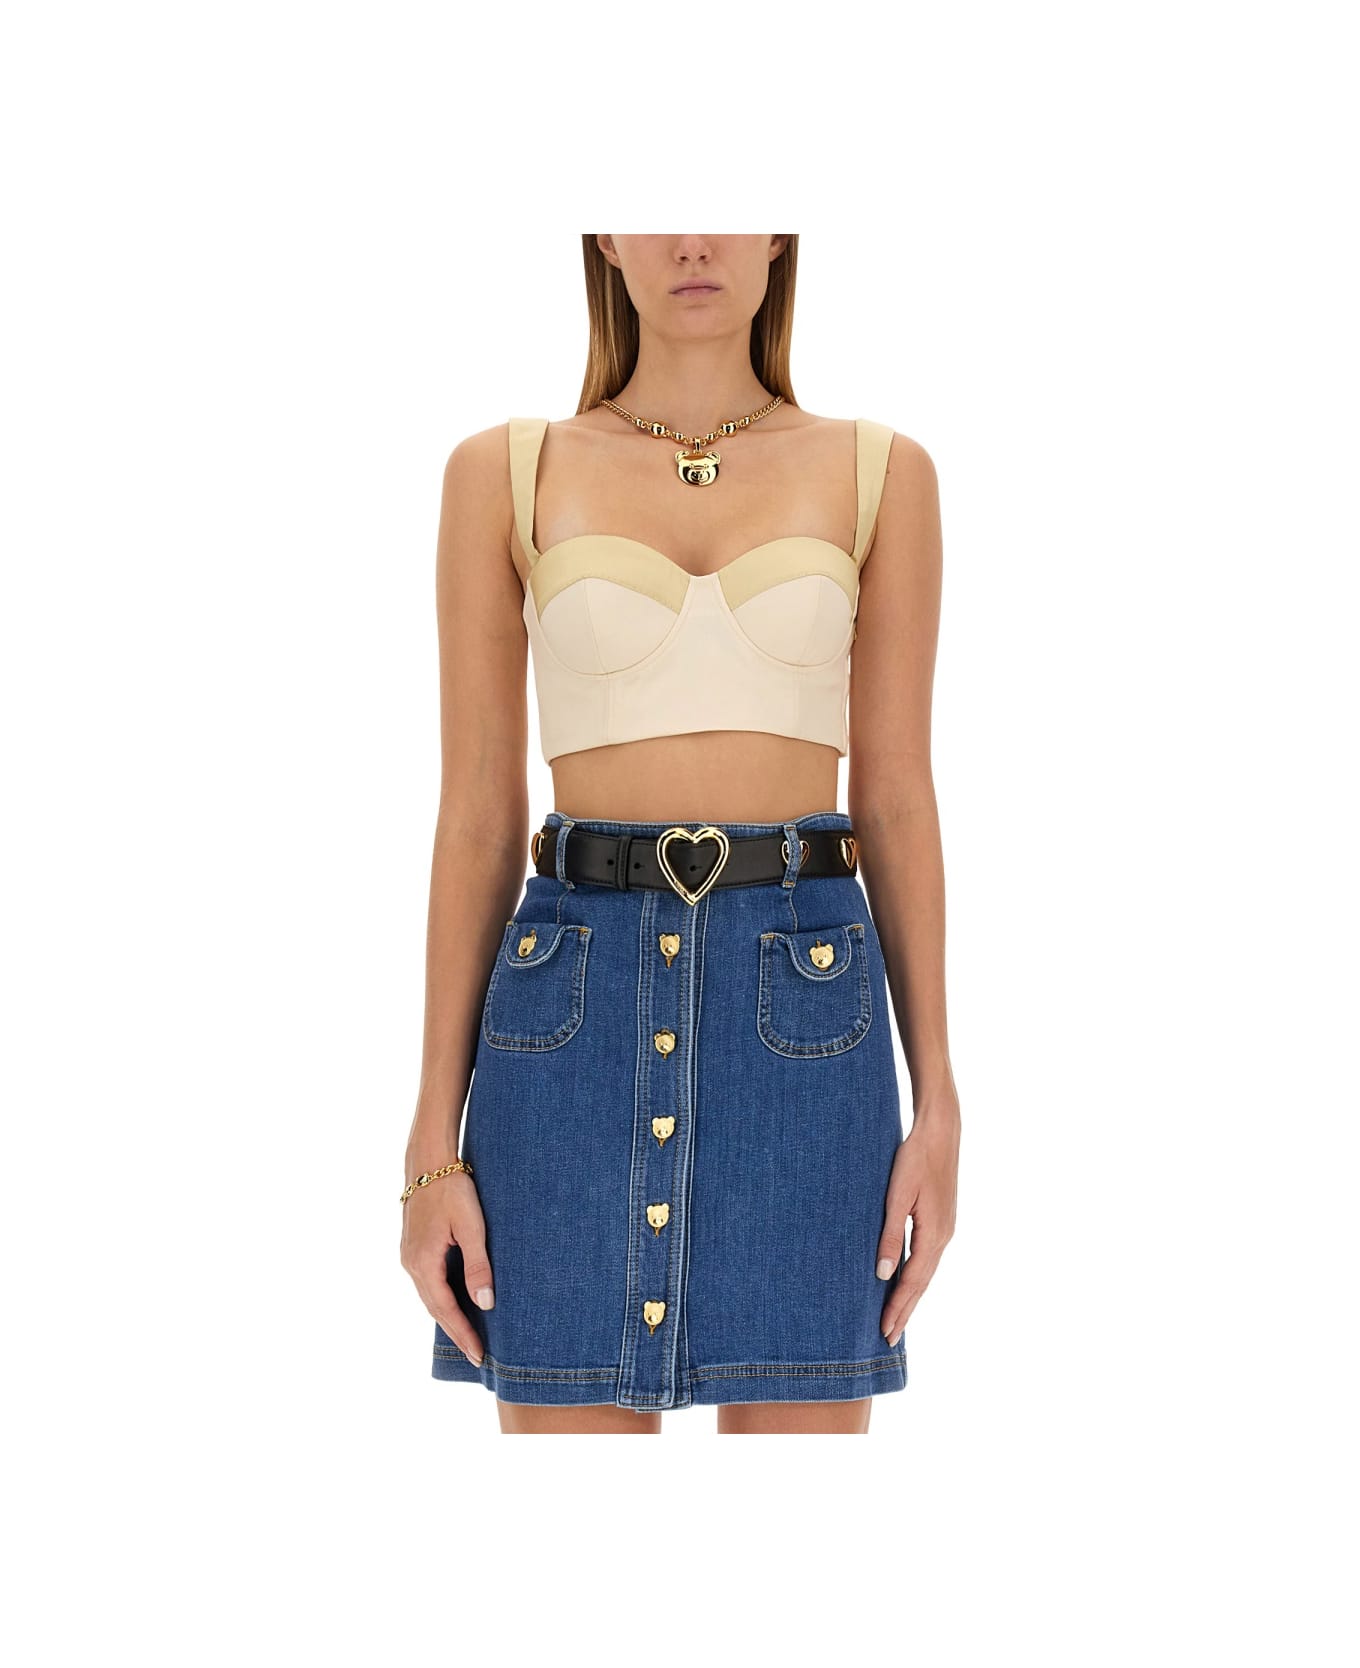 Moschino Top Bustier - IVORY